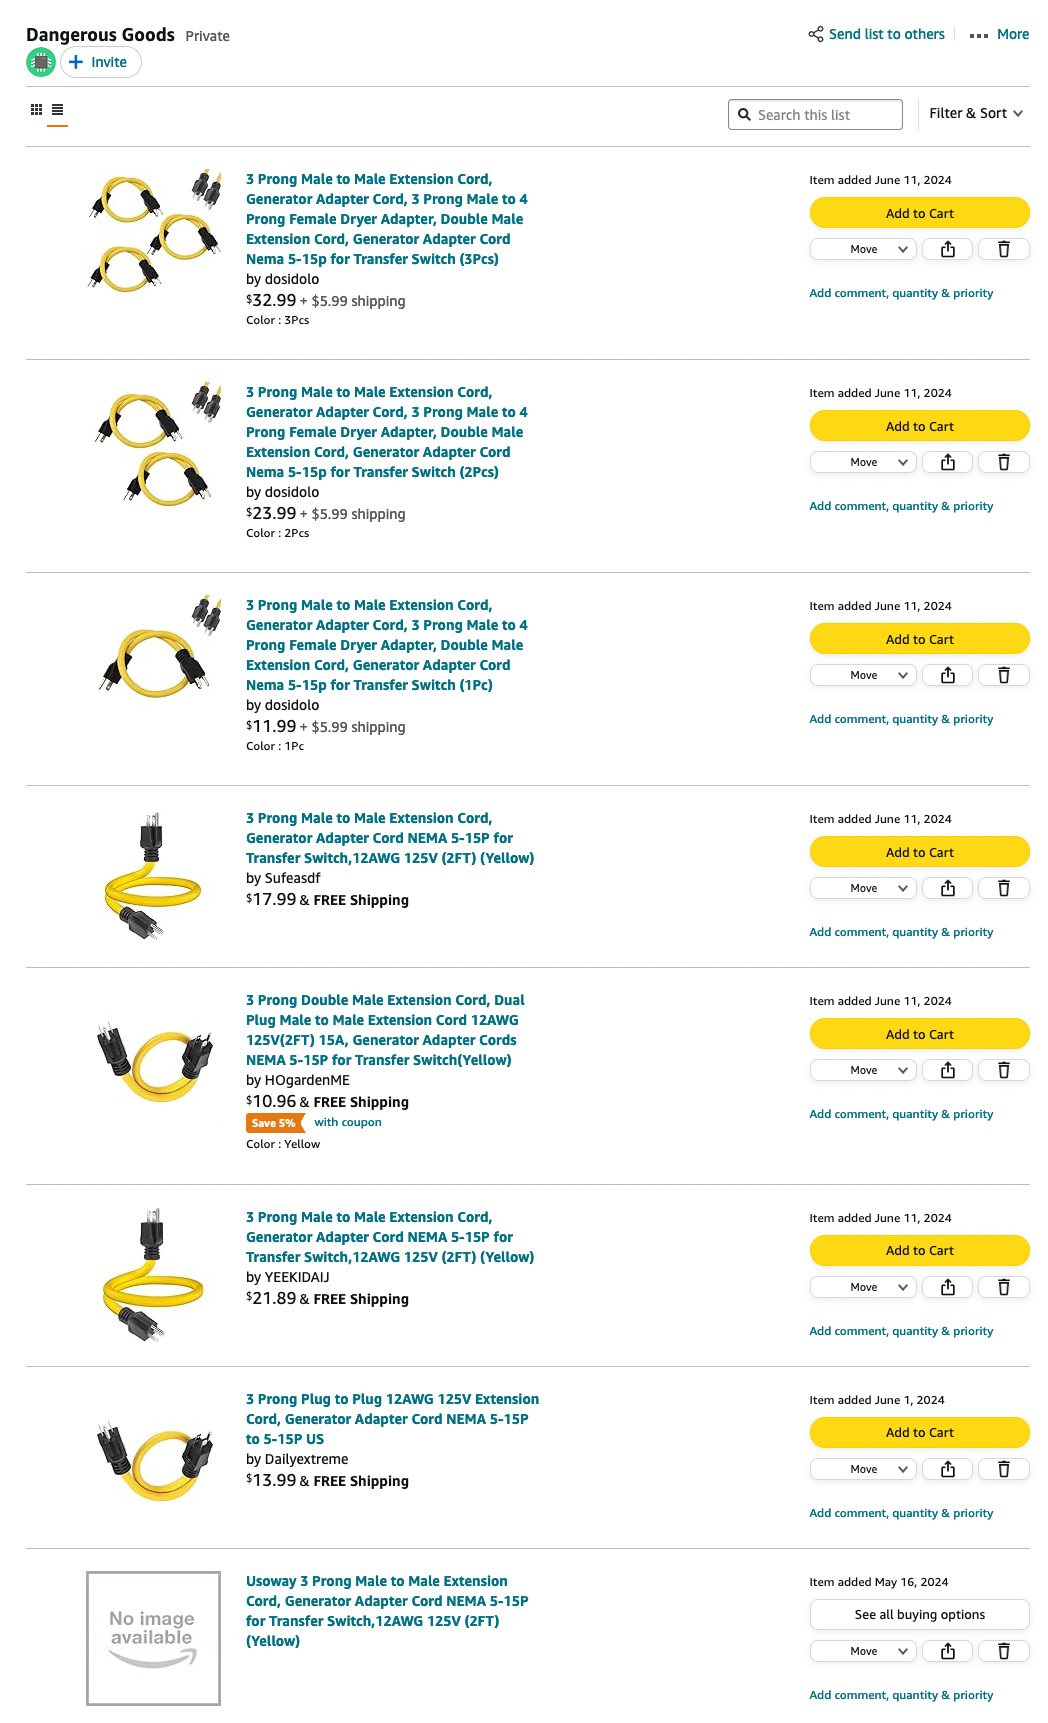 screenshot of amazon shopping list called "dangerous goods", with 8 suicide cords, 7 available for purchase.